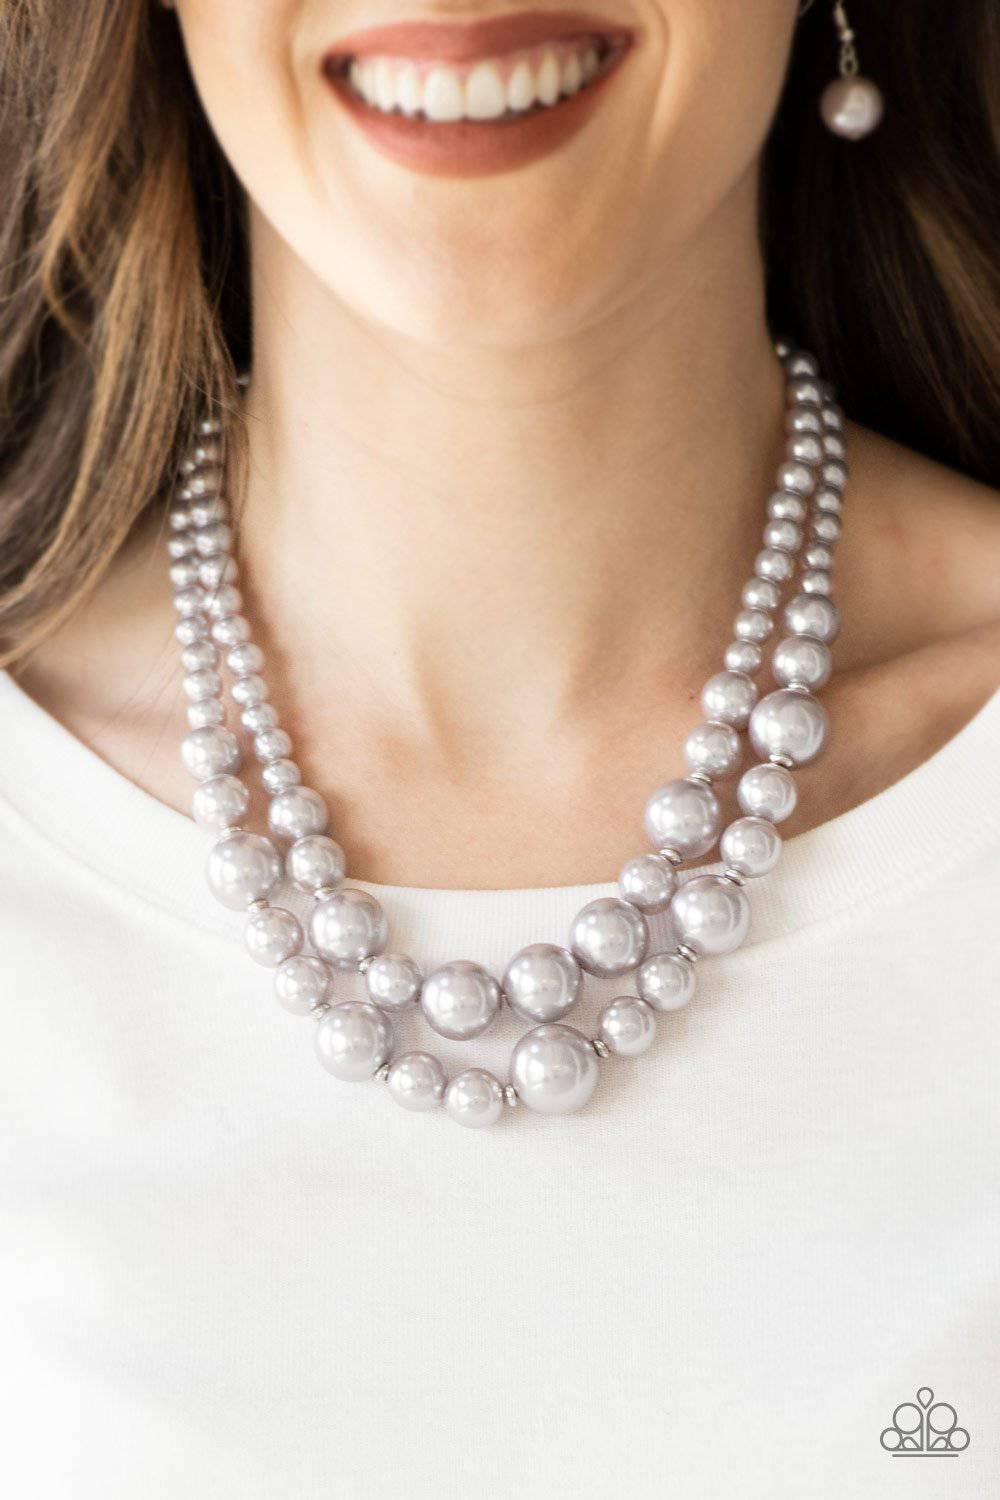 The More The Modest - Silver Pearl Necklace - Paparazzi Accessories - GlaMarous Titi Jewels